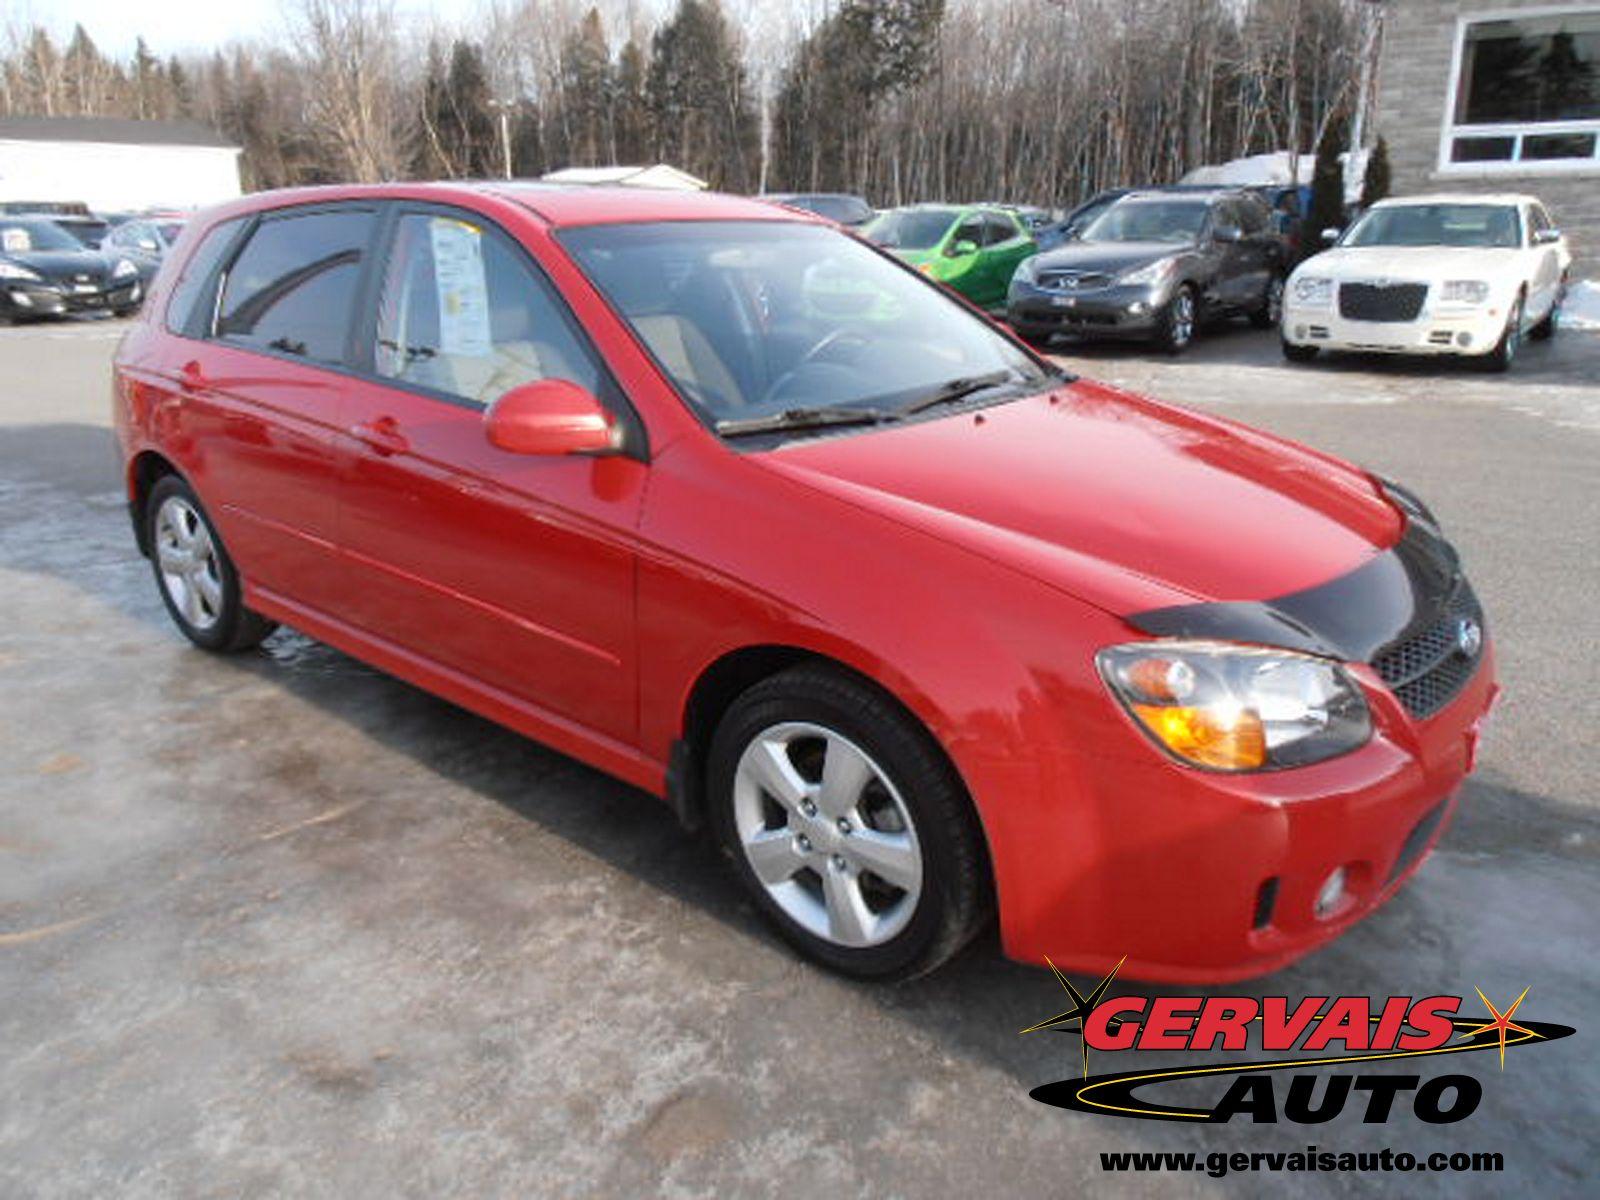 Used 2009 Kia Spectra 5 SX, $8,495 - Shawinigan and Trois-RiviÃ¨res ...